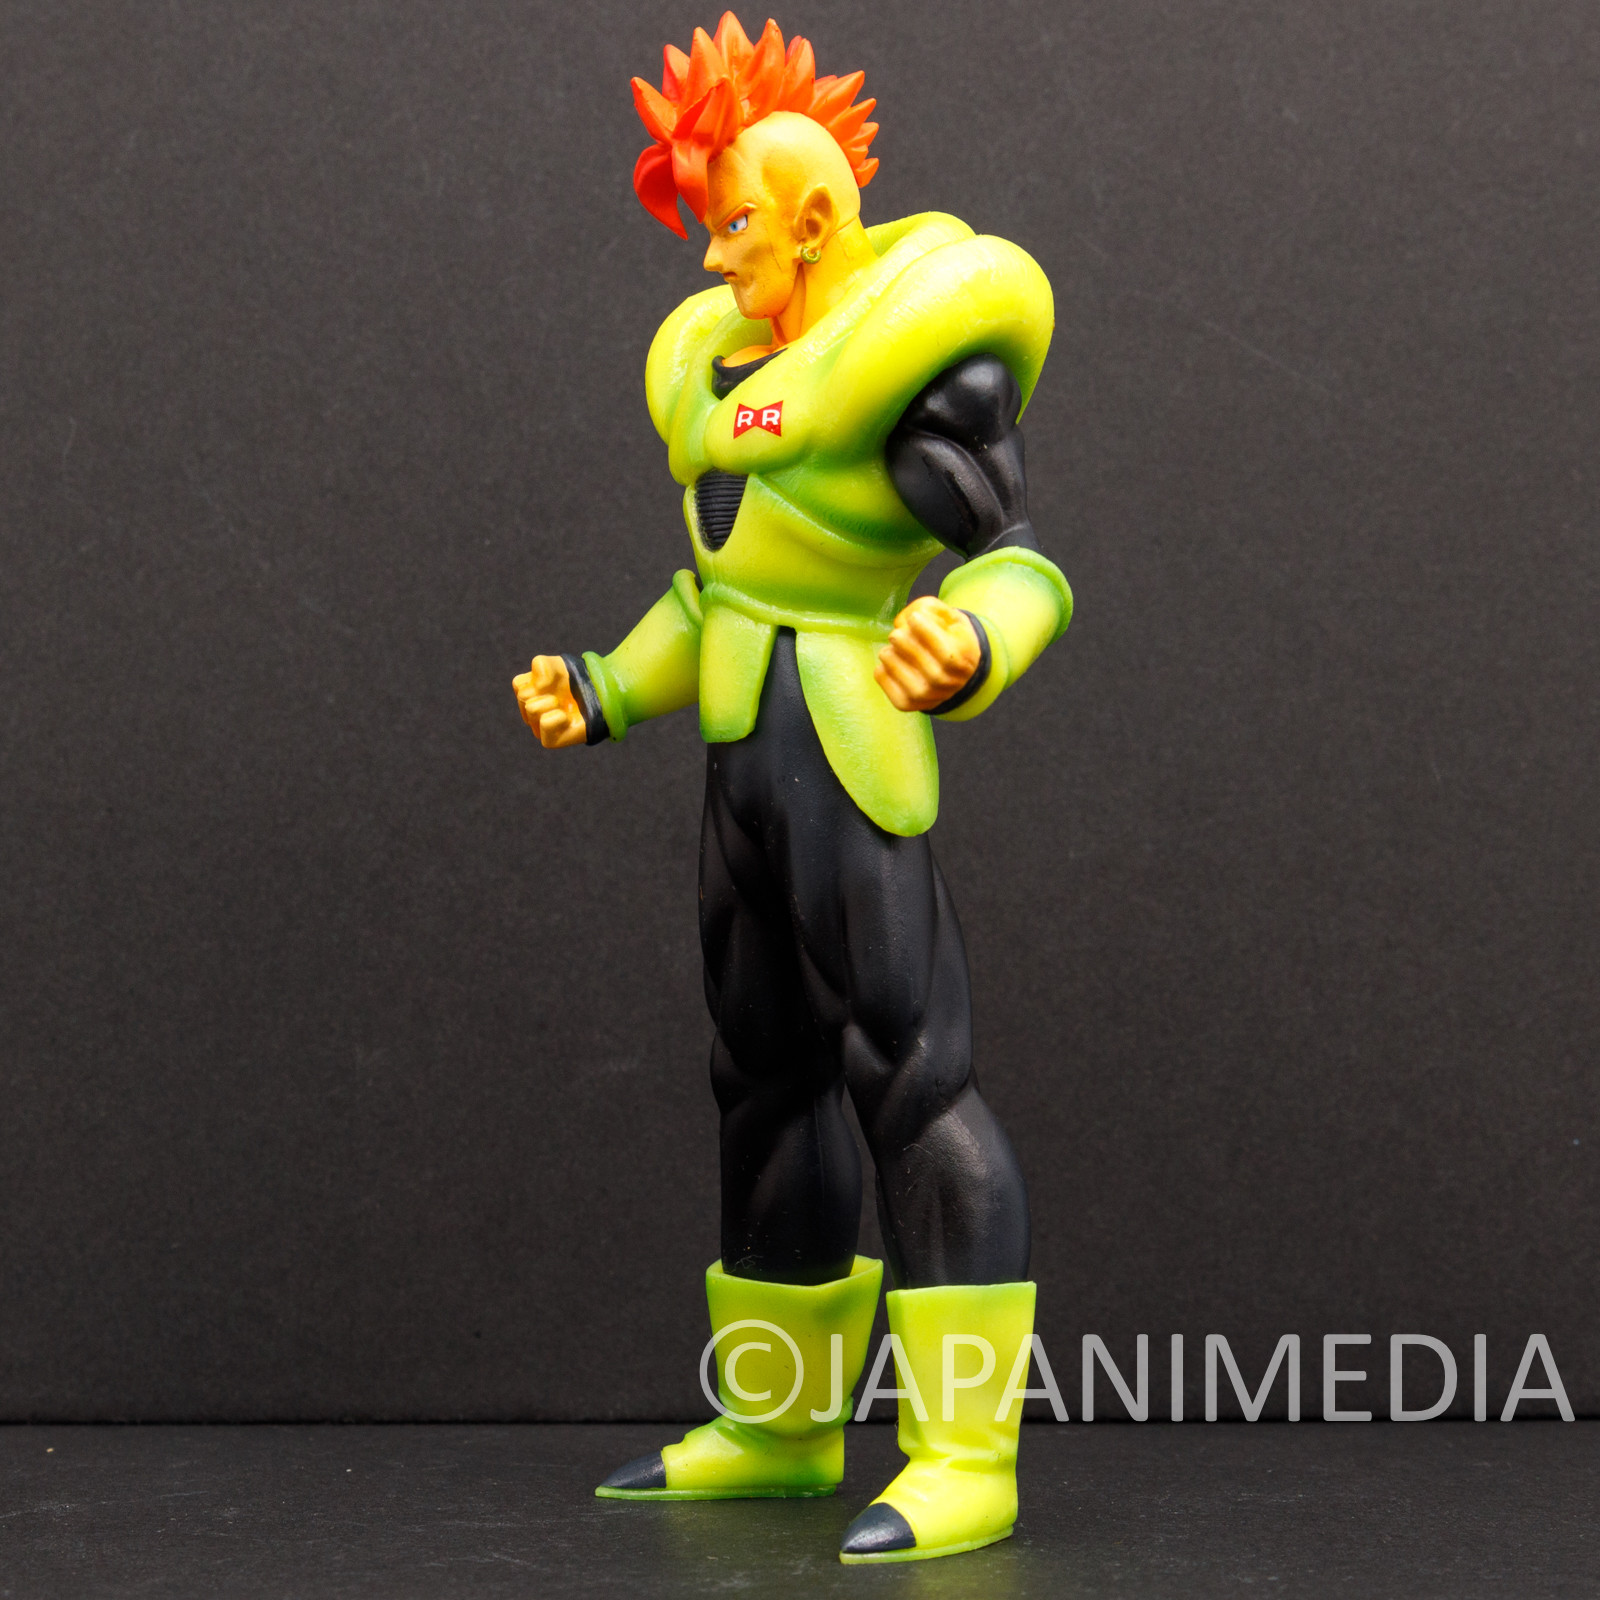 Dragon Ball Z Android 16 HSCF Figure high spec coloring JAPAN ANIME